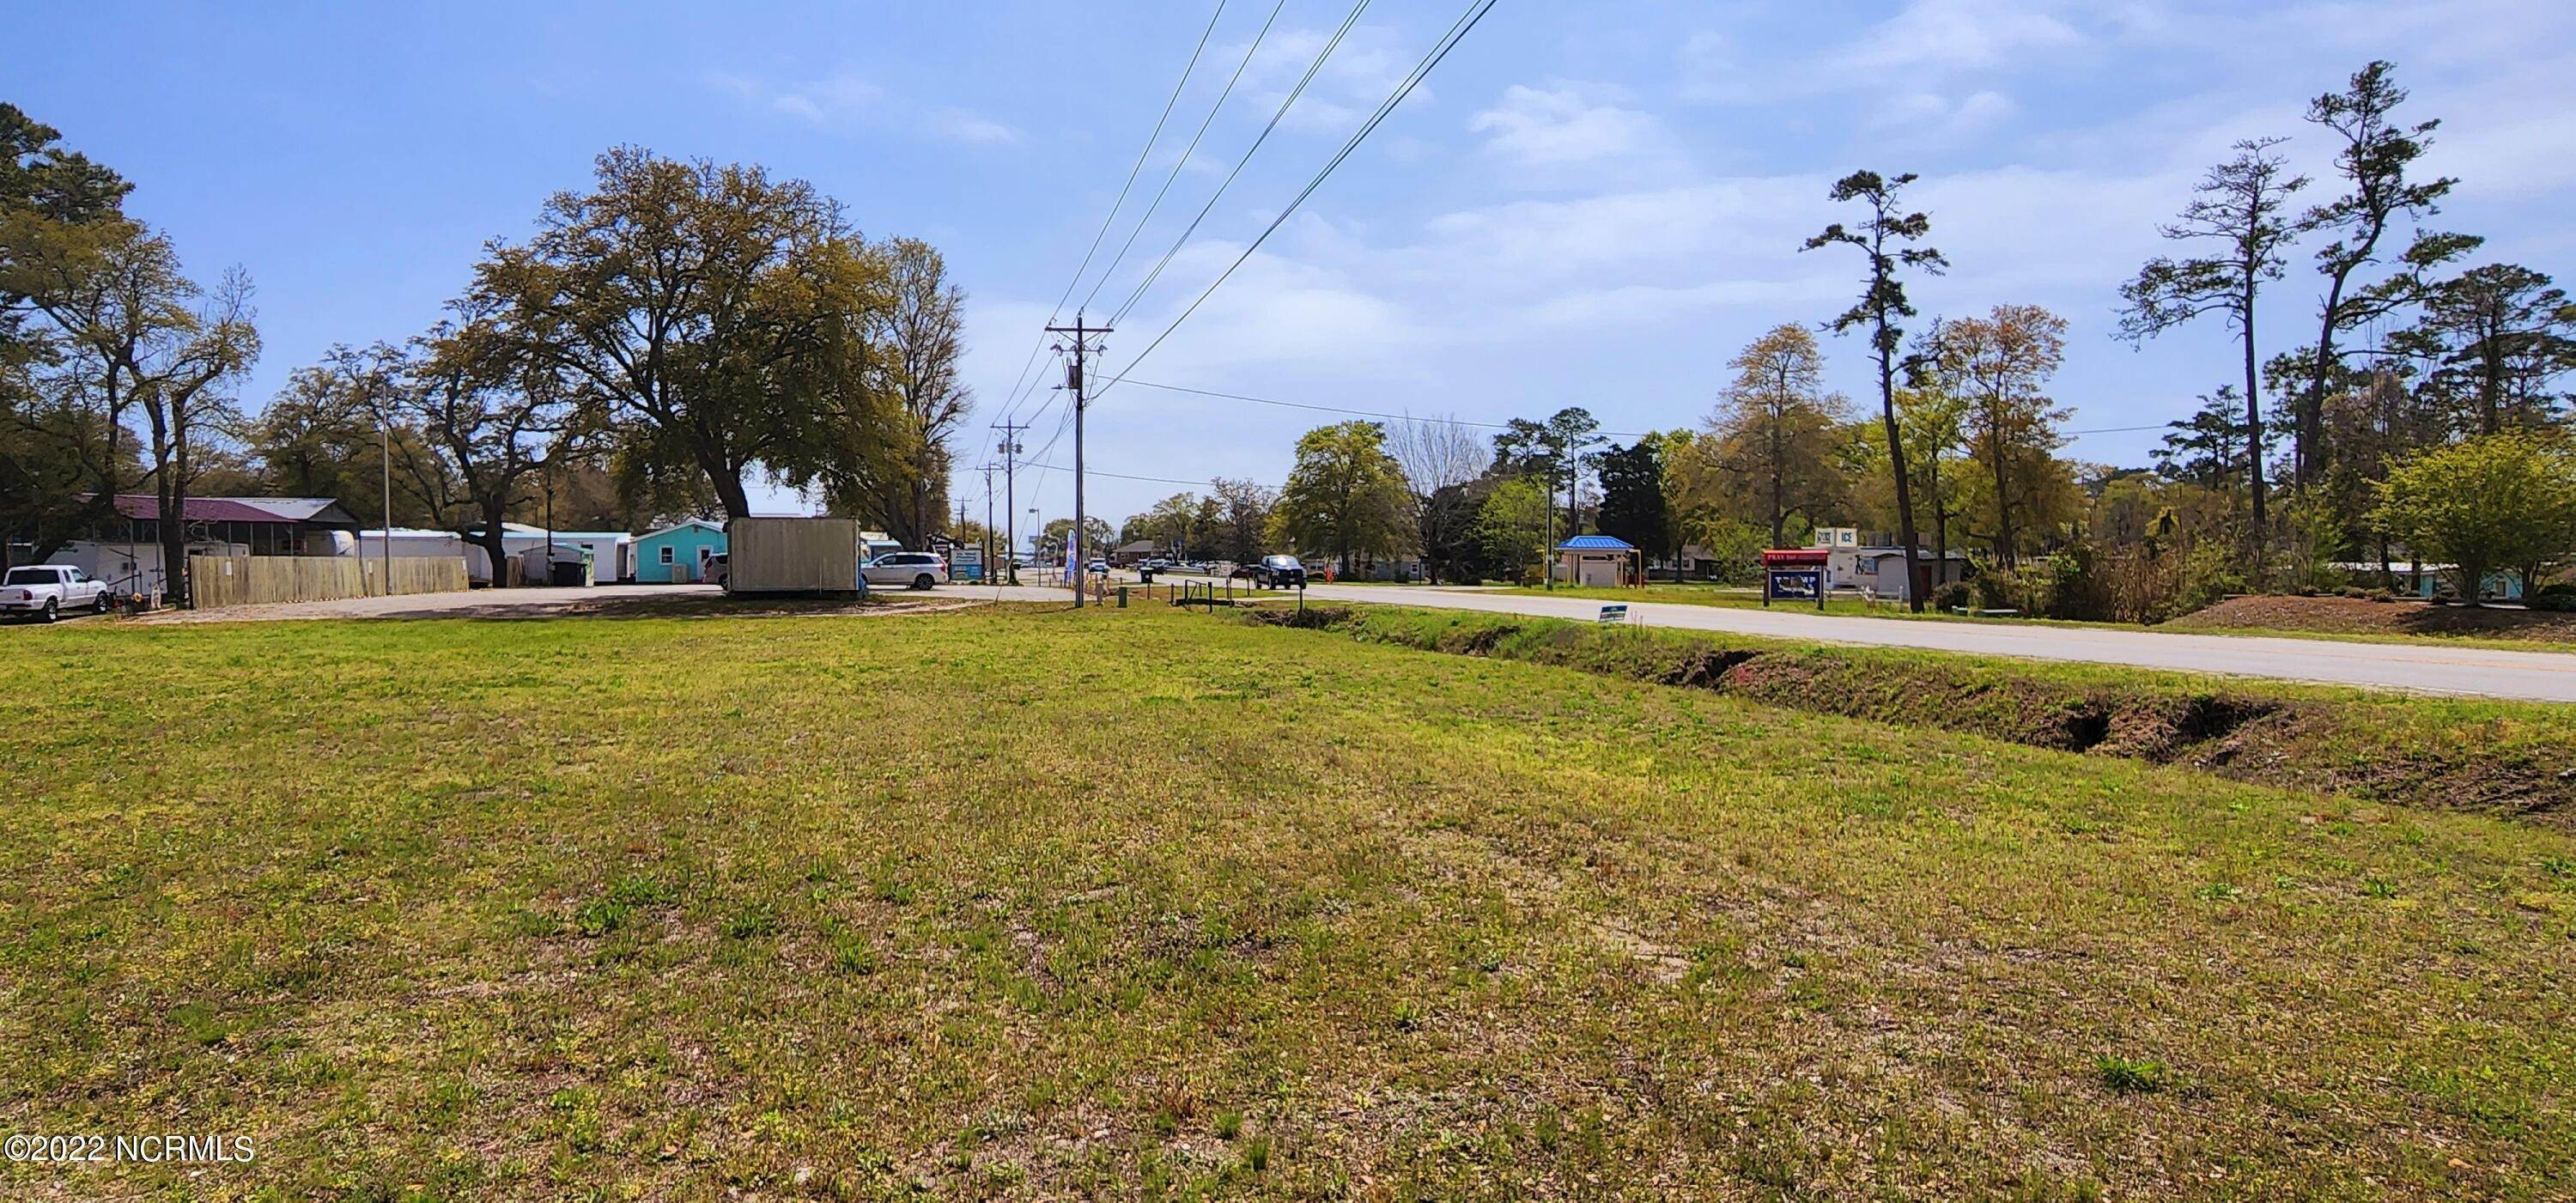 Land for Sale at 3288 Holden Beach Road Supply, North Carolina 28462 United States